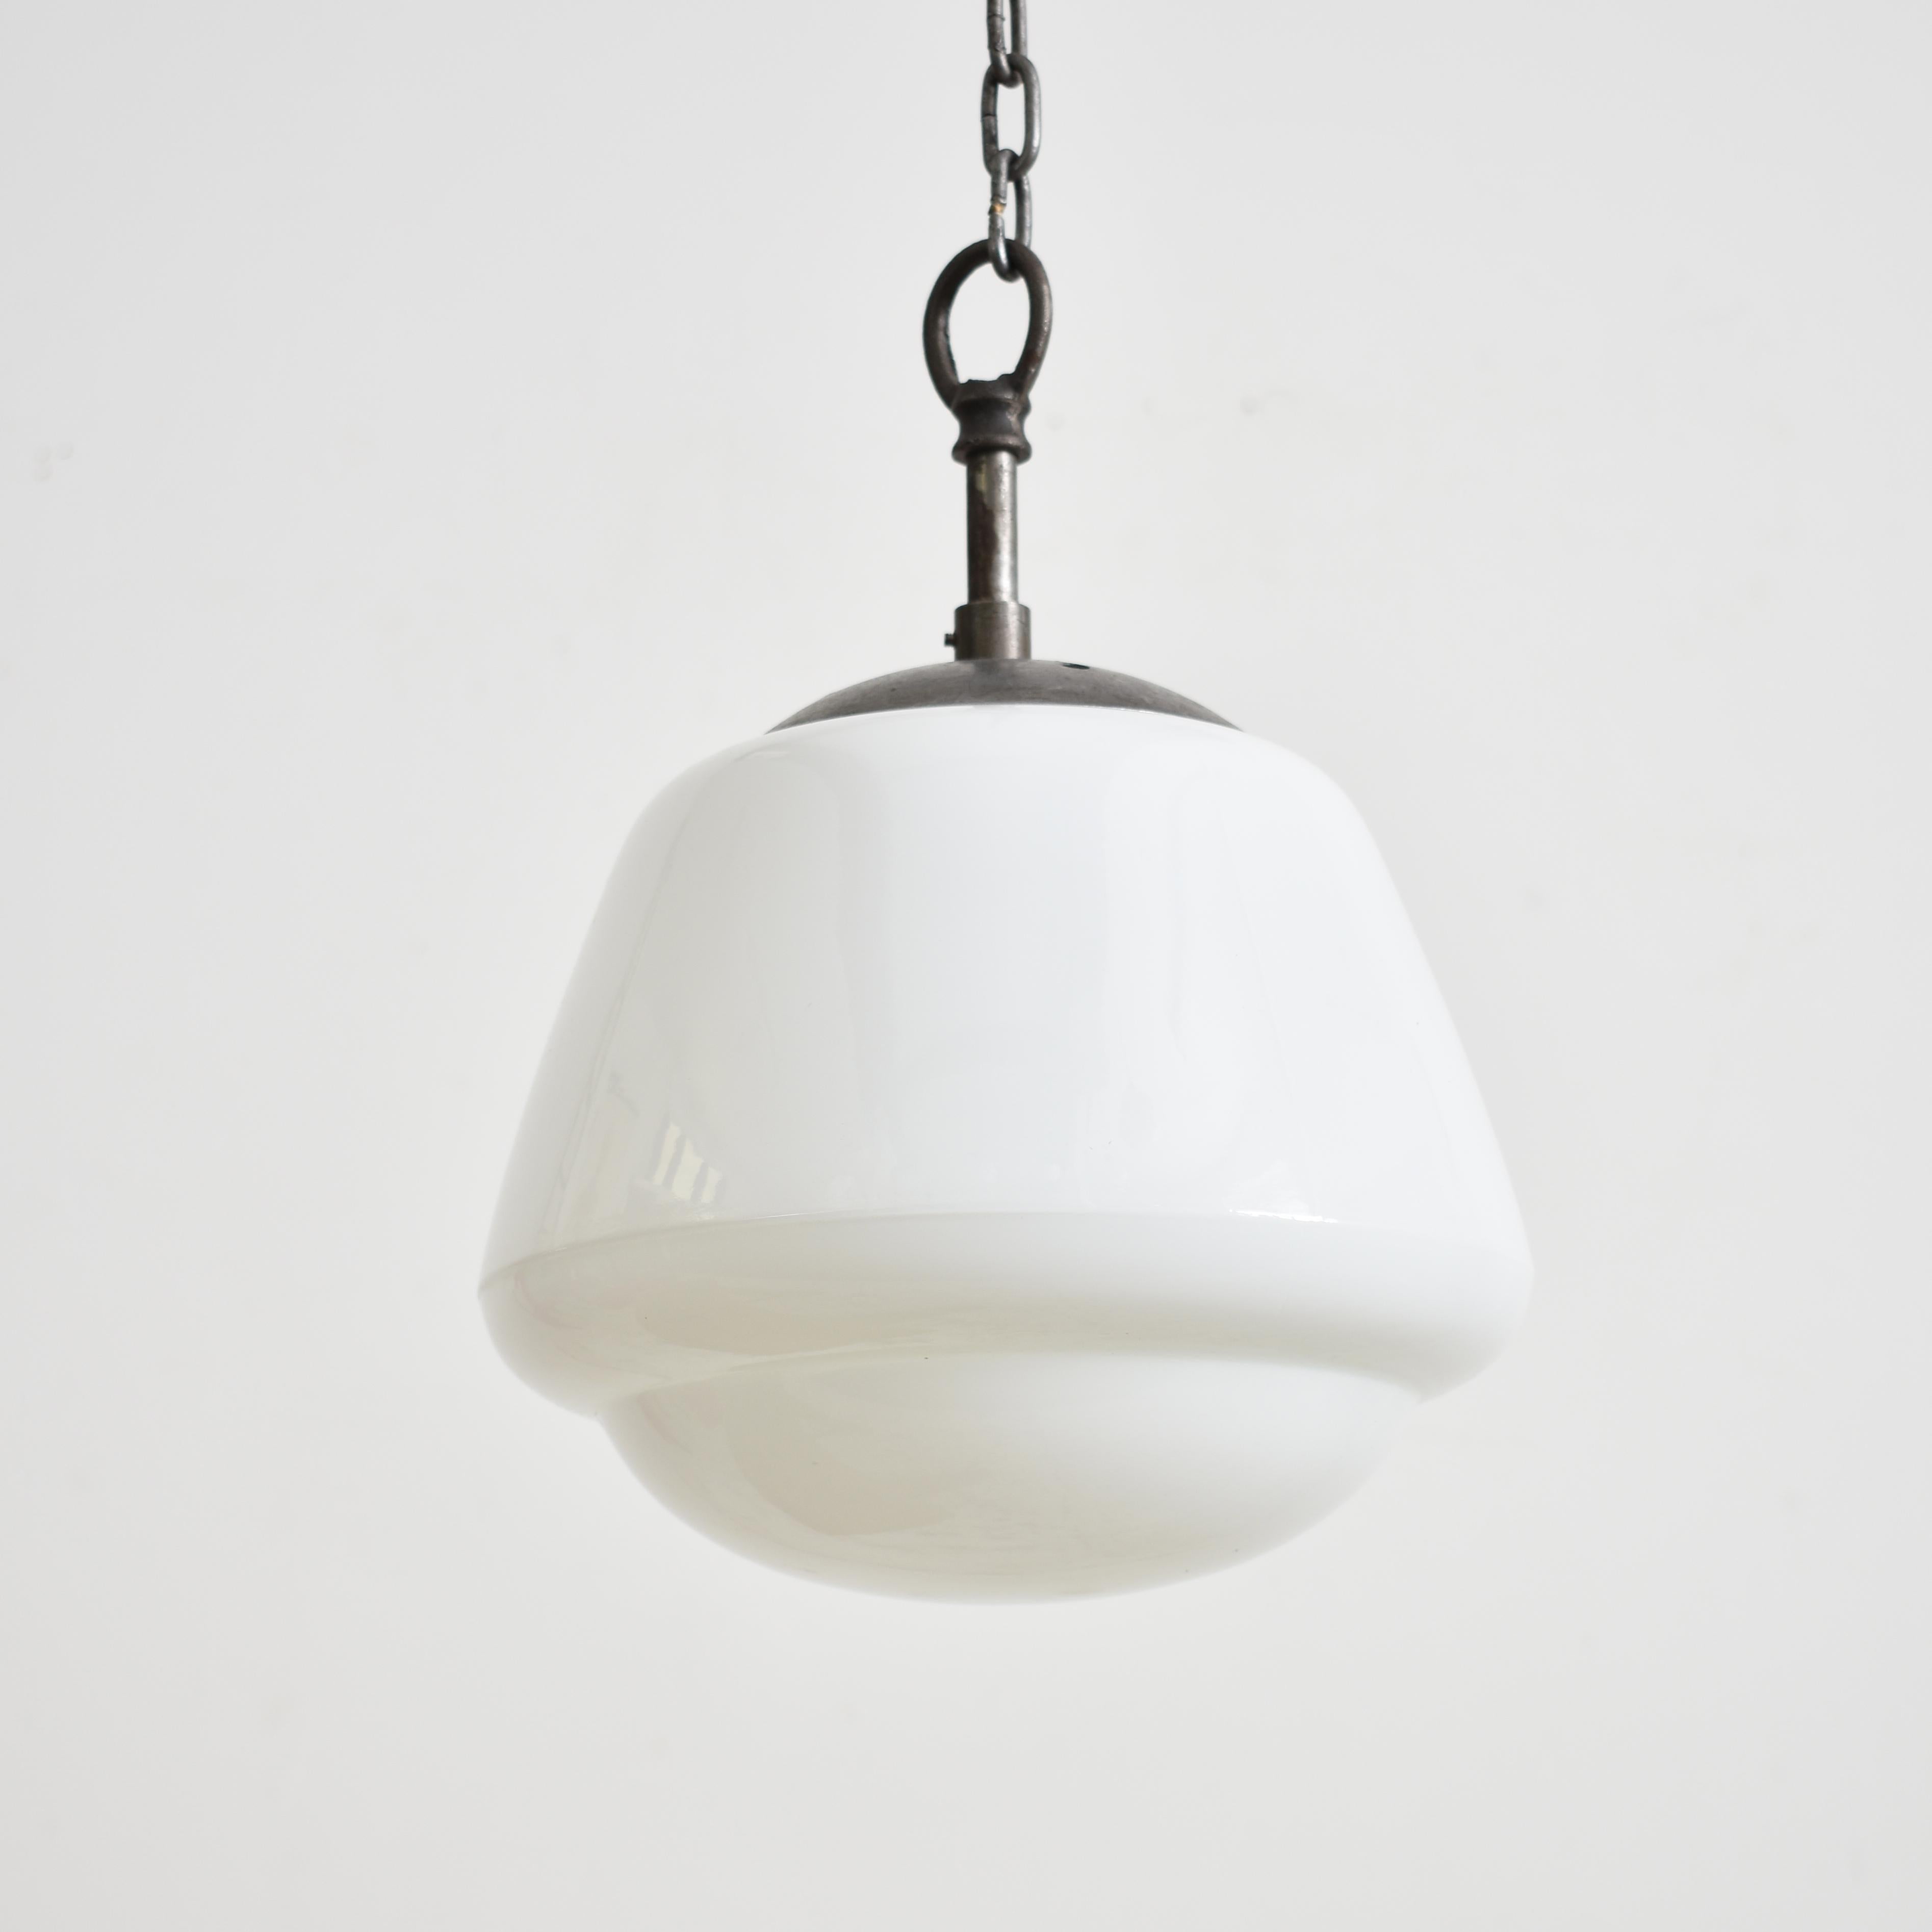 Czech Opaline Pendant Light – A

A vintage opaline glass pendant light salvaged from a school in former Czechoslovakia, featuring a lovely moulded decorative shape. The glass which has a gloss finish provides a striking even glow when illuminated .